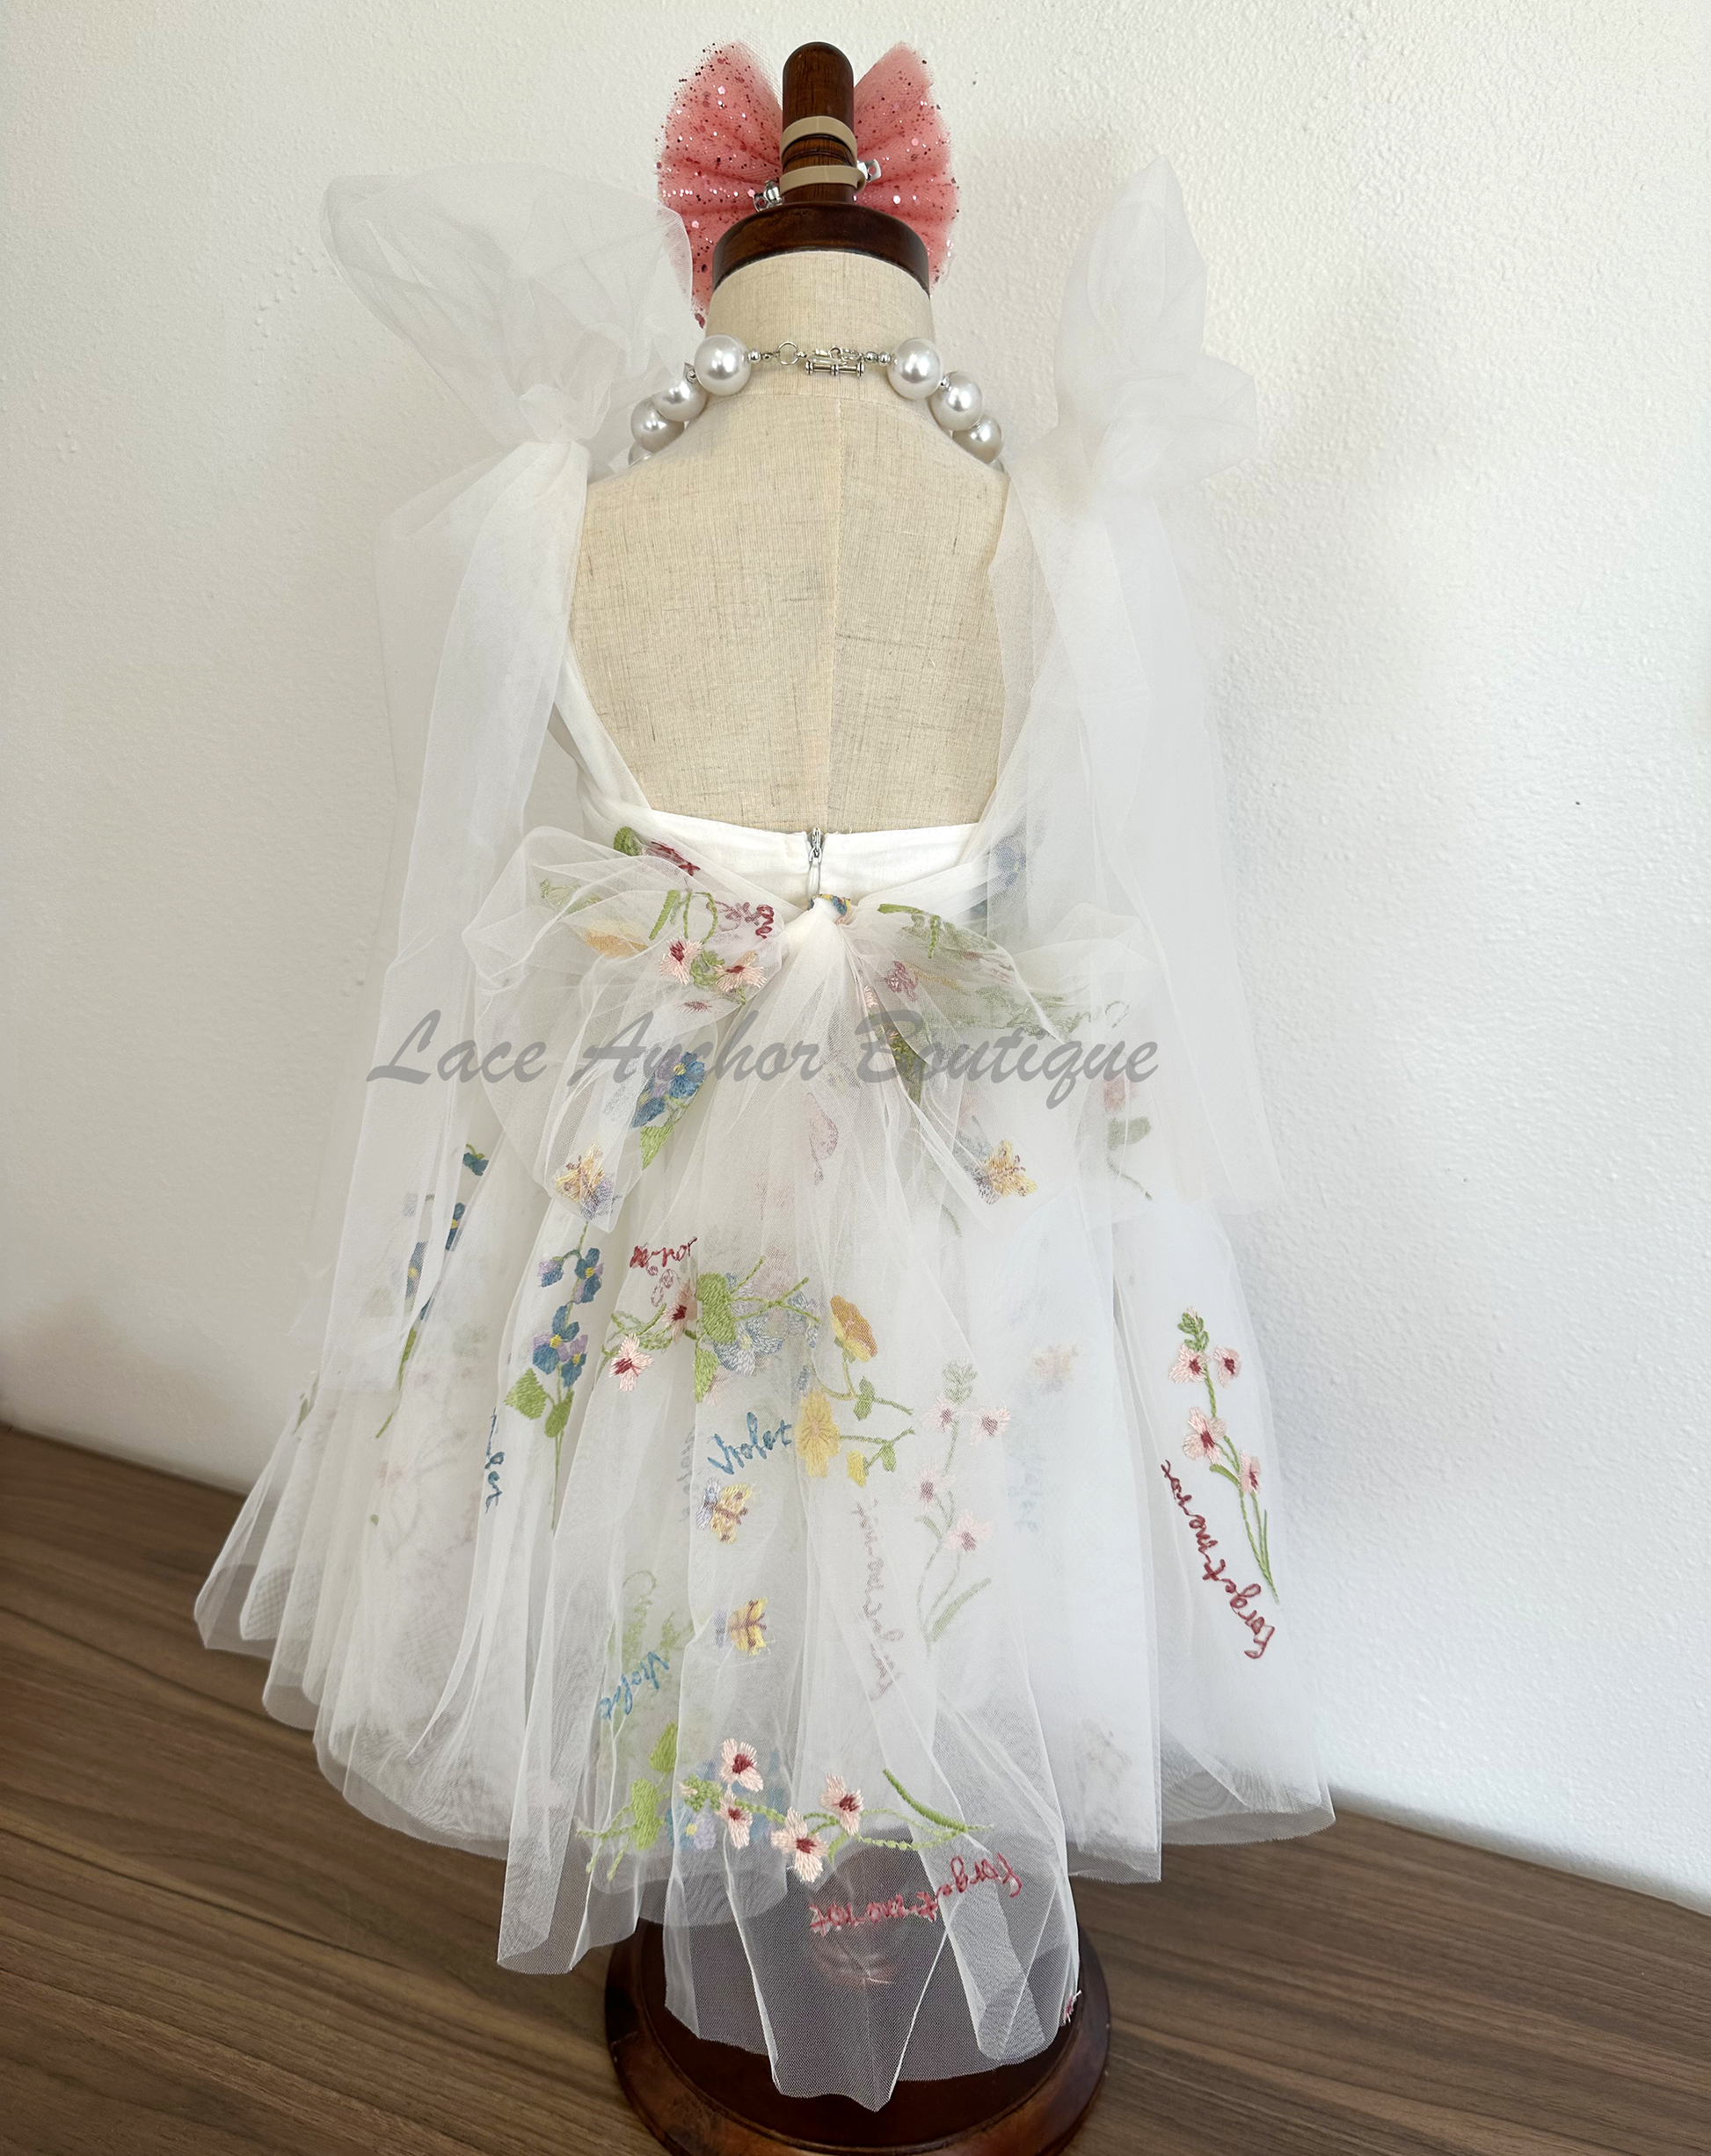 toddler youth puffy tied shoulder flower girl dress with large tied bow tied at waist. Outfits in white with embroidered floral print.